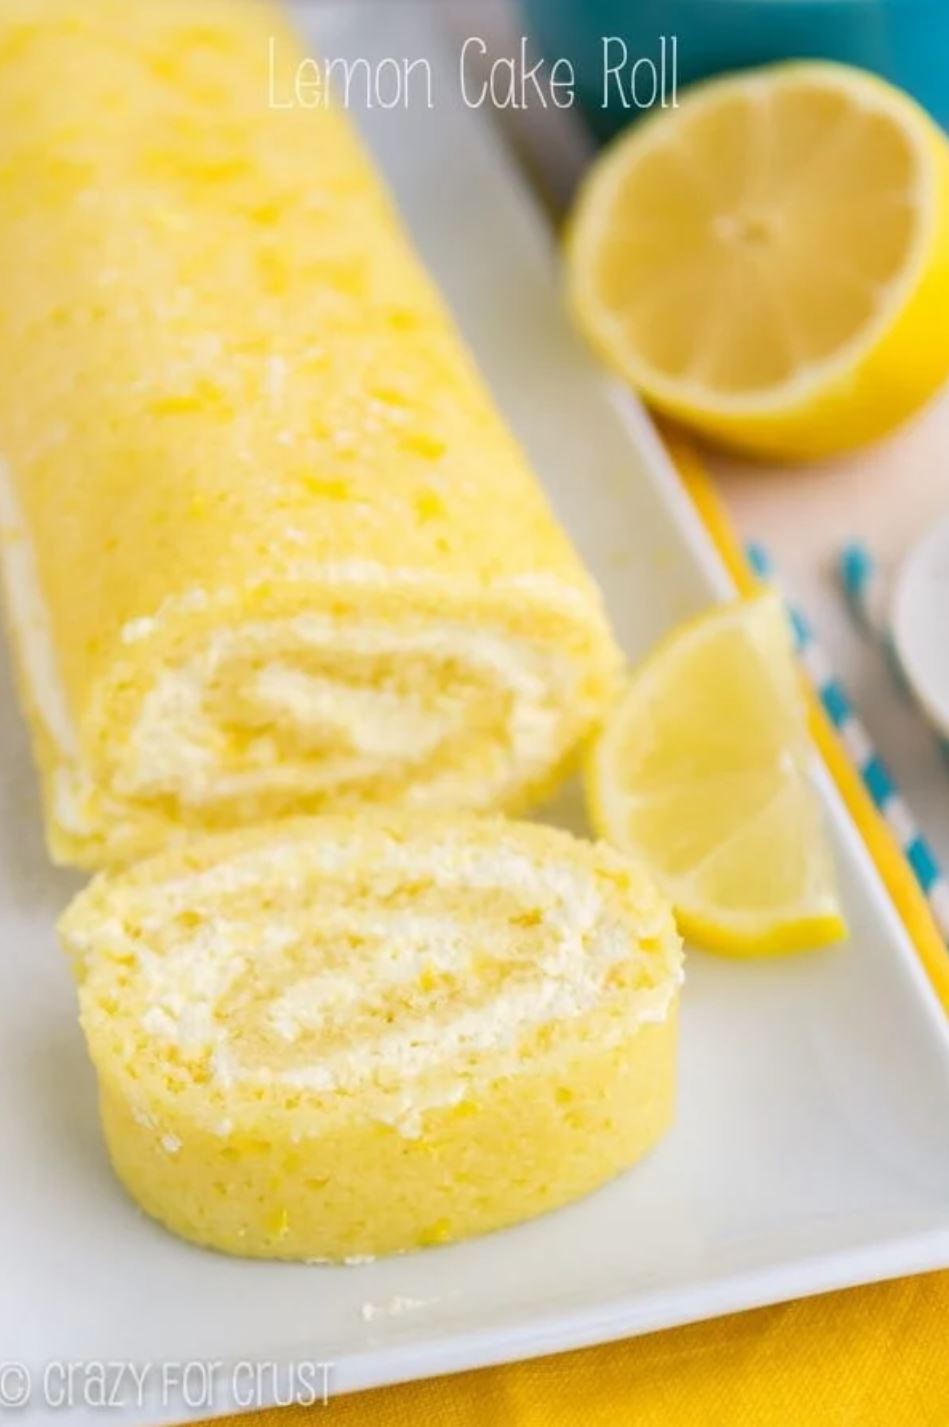 Picture of the completed lemon roll cake